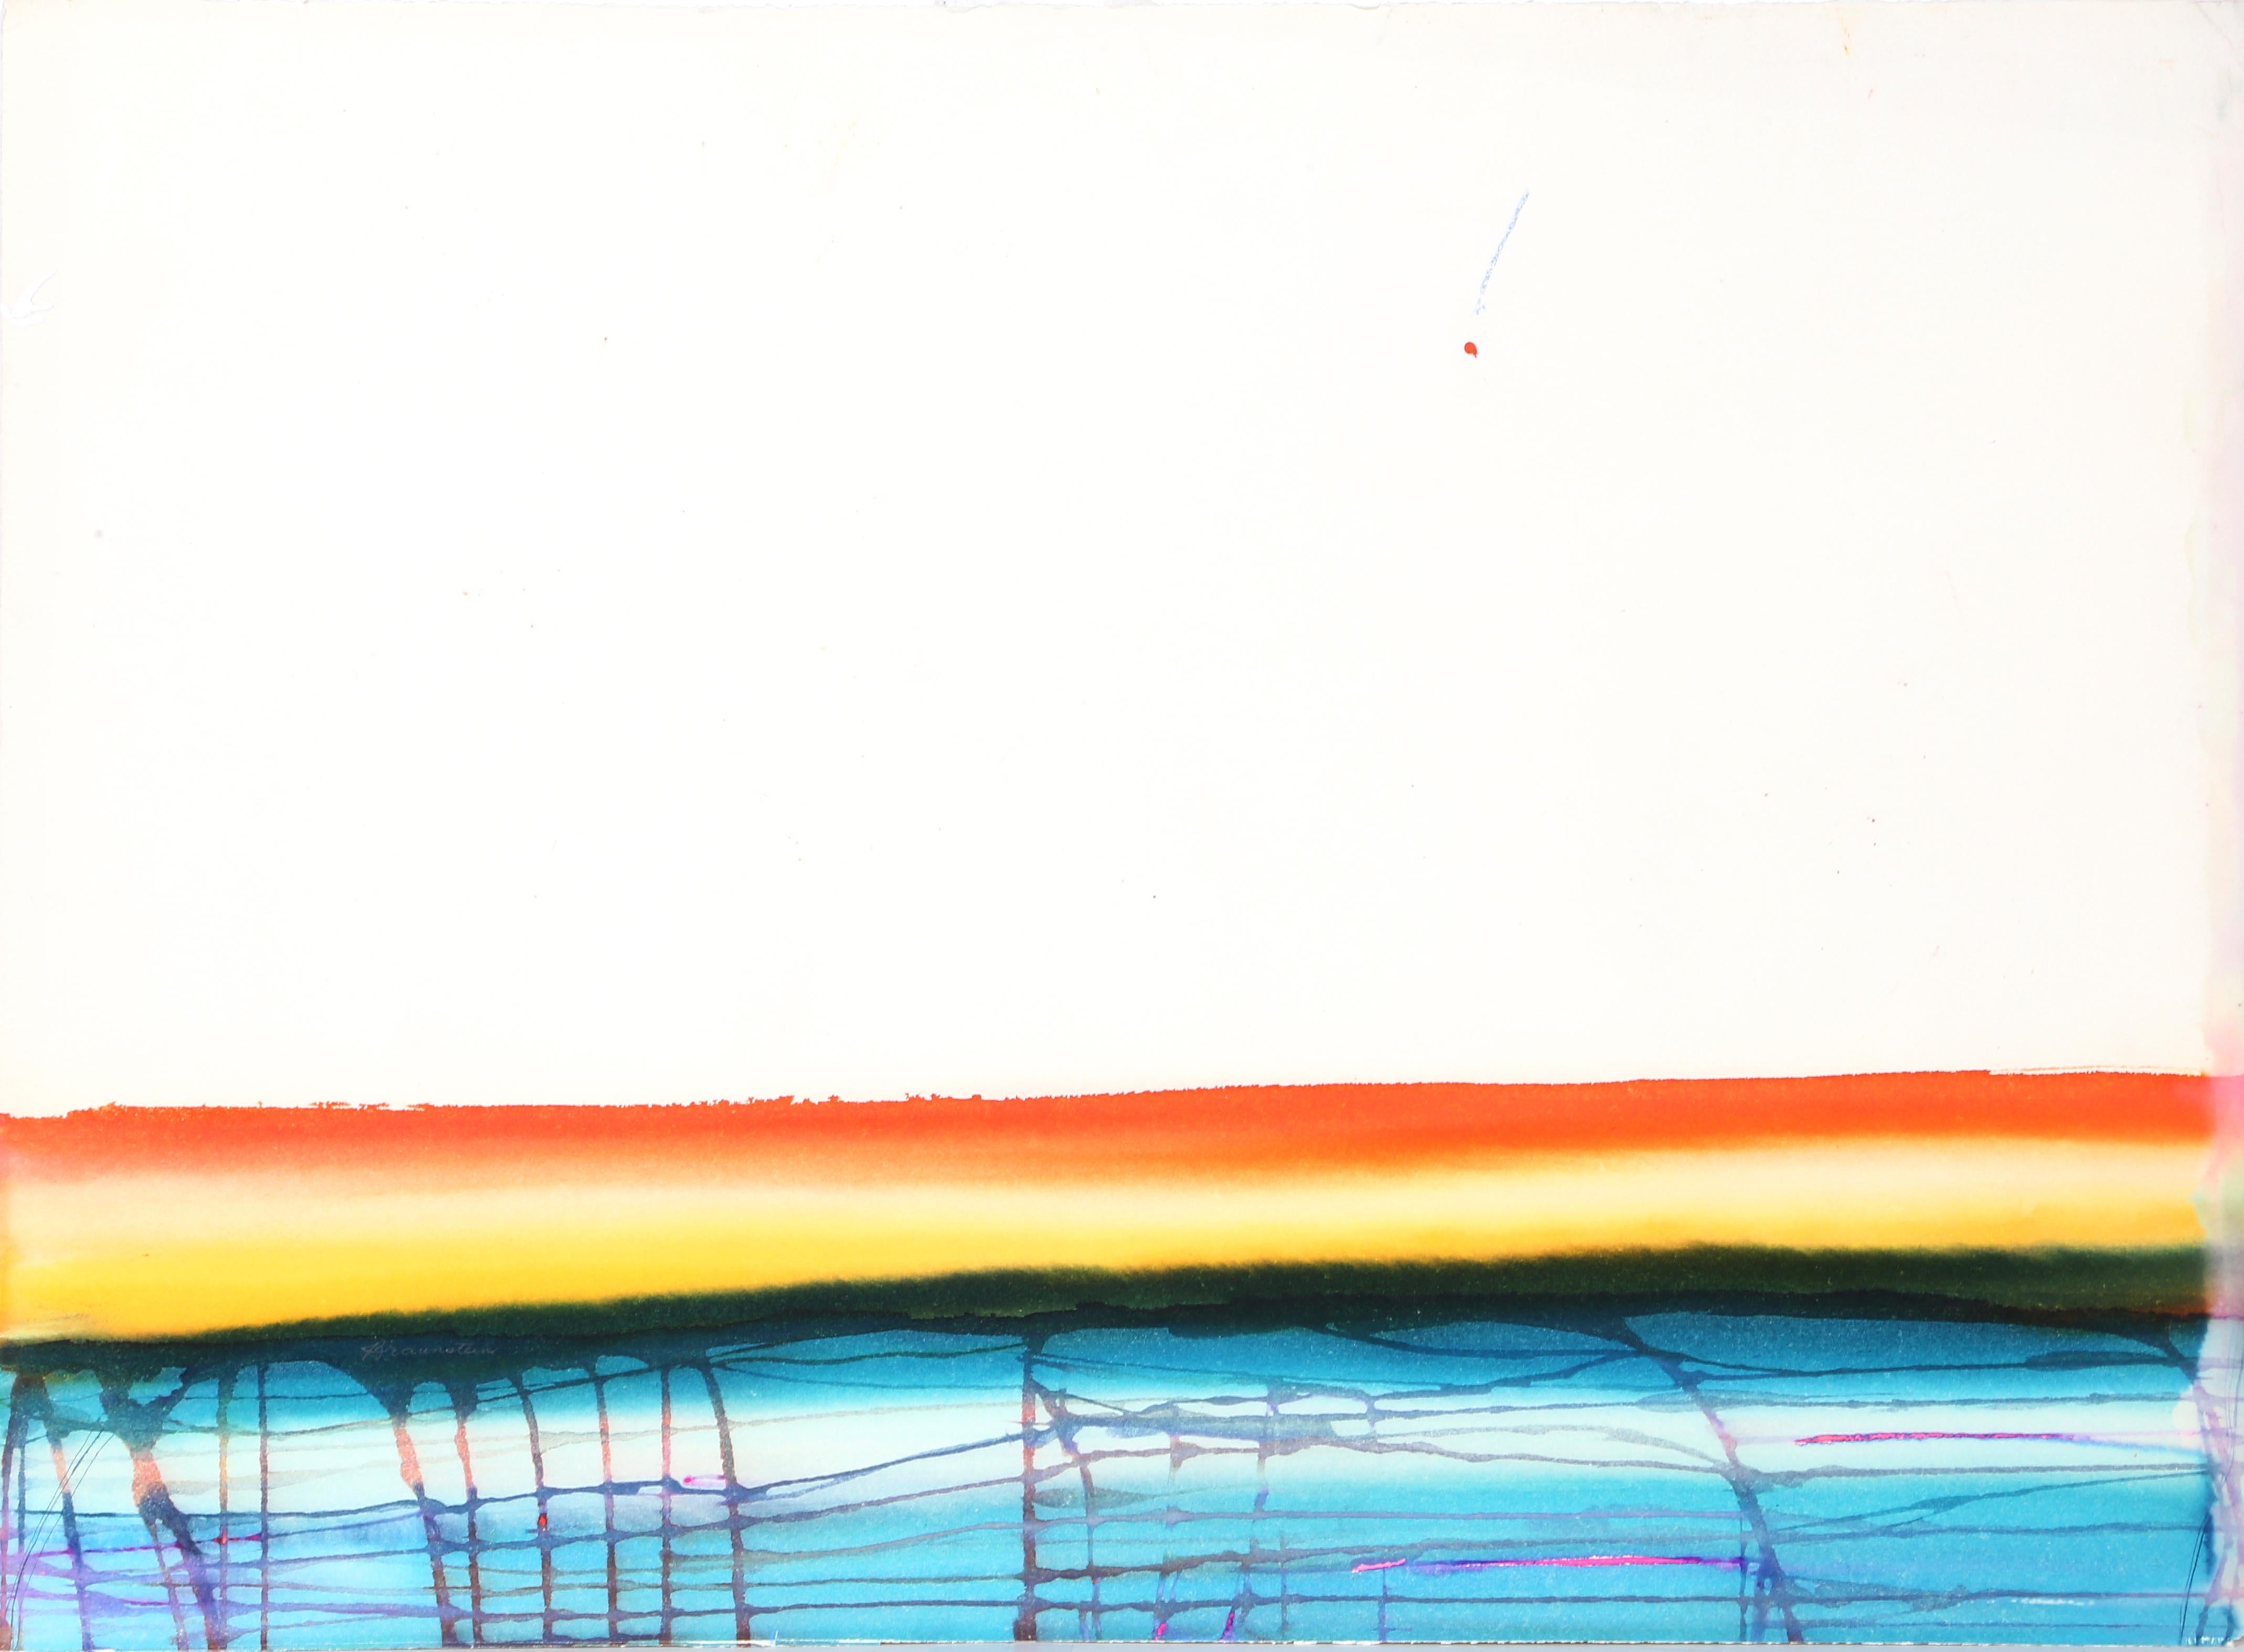 Two-thirds of this abstract composition by Geri Taper are blank white paper. In the lower third, a sunset of red and yellow quickly gives way to black then bright blue like an ocean. This unique watercolor is signed in pencil.

Golden Latitude
Geri